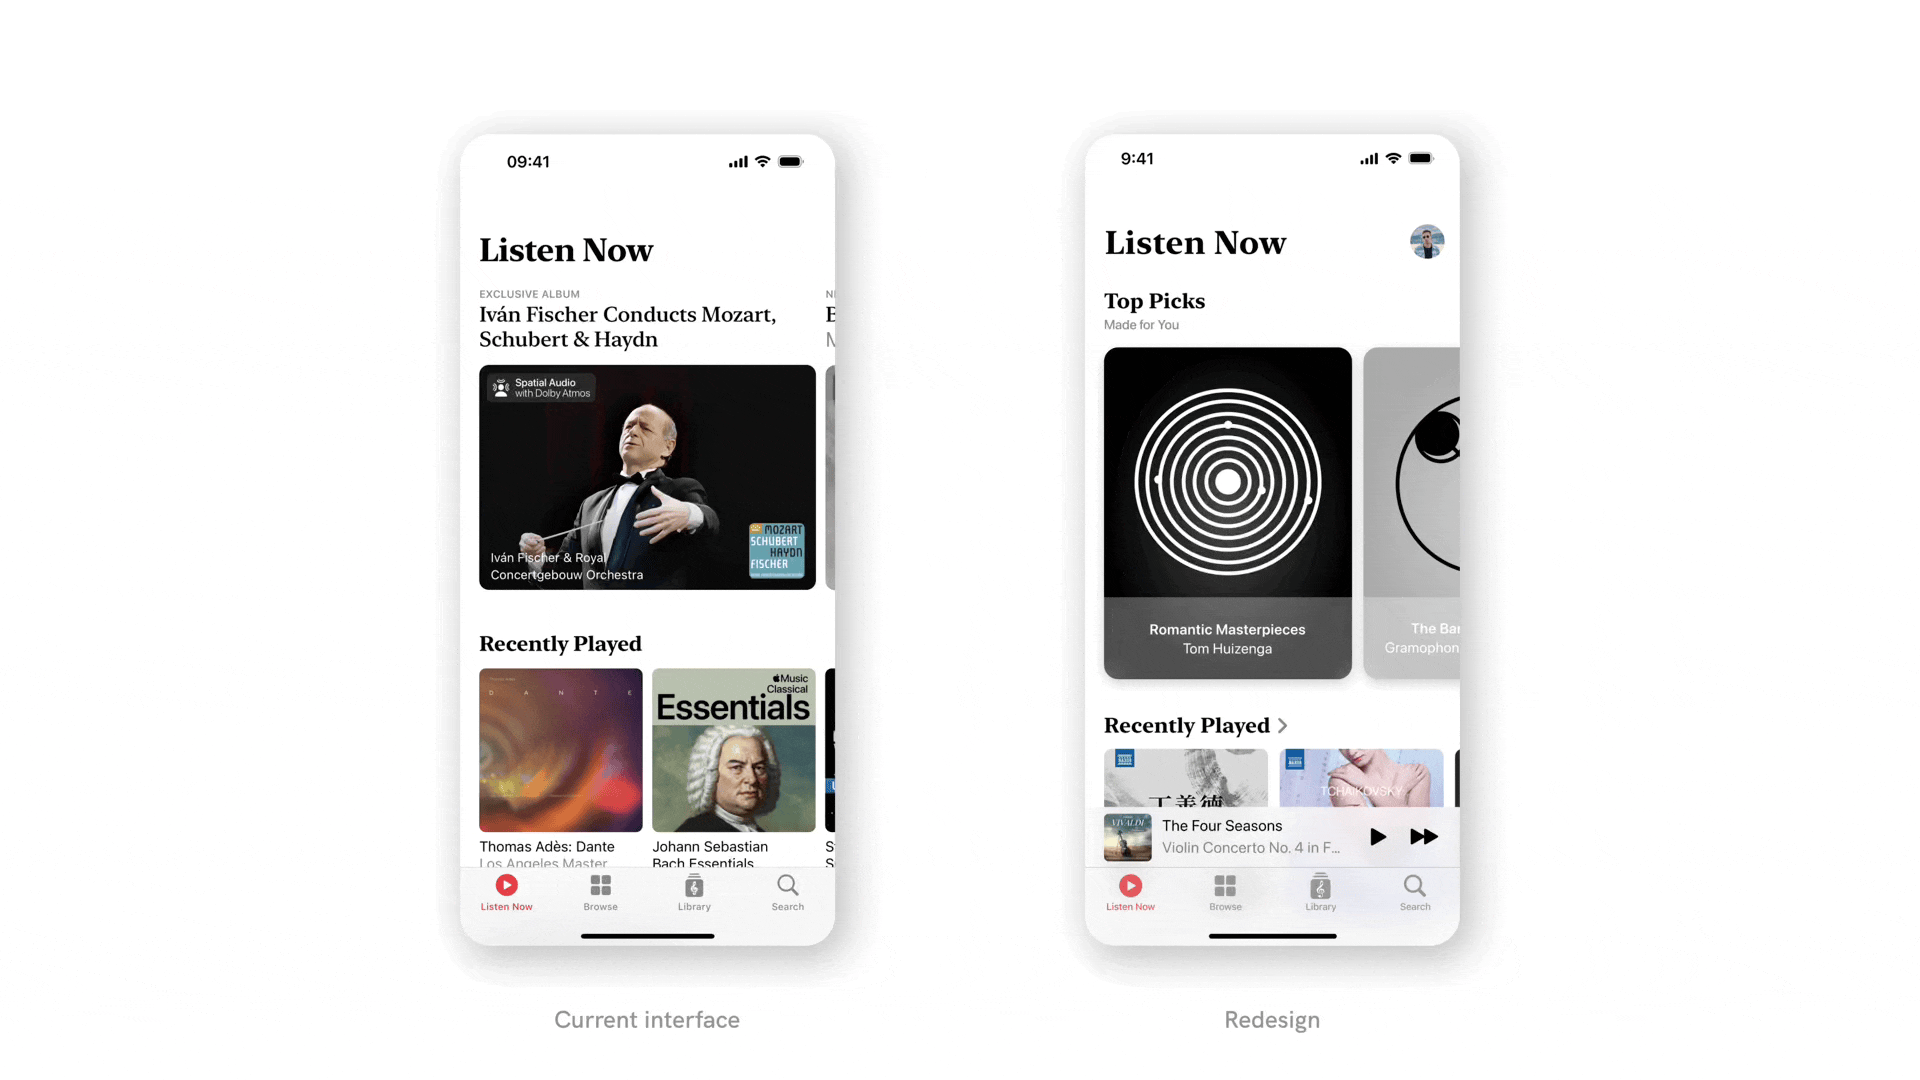 On the left, the current user interface of Apple Music Classical is displayed, while on the right, the proposed redesign is presented for comparison.